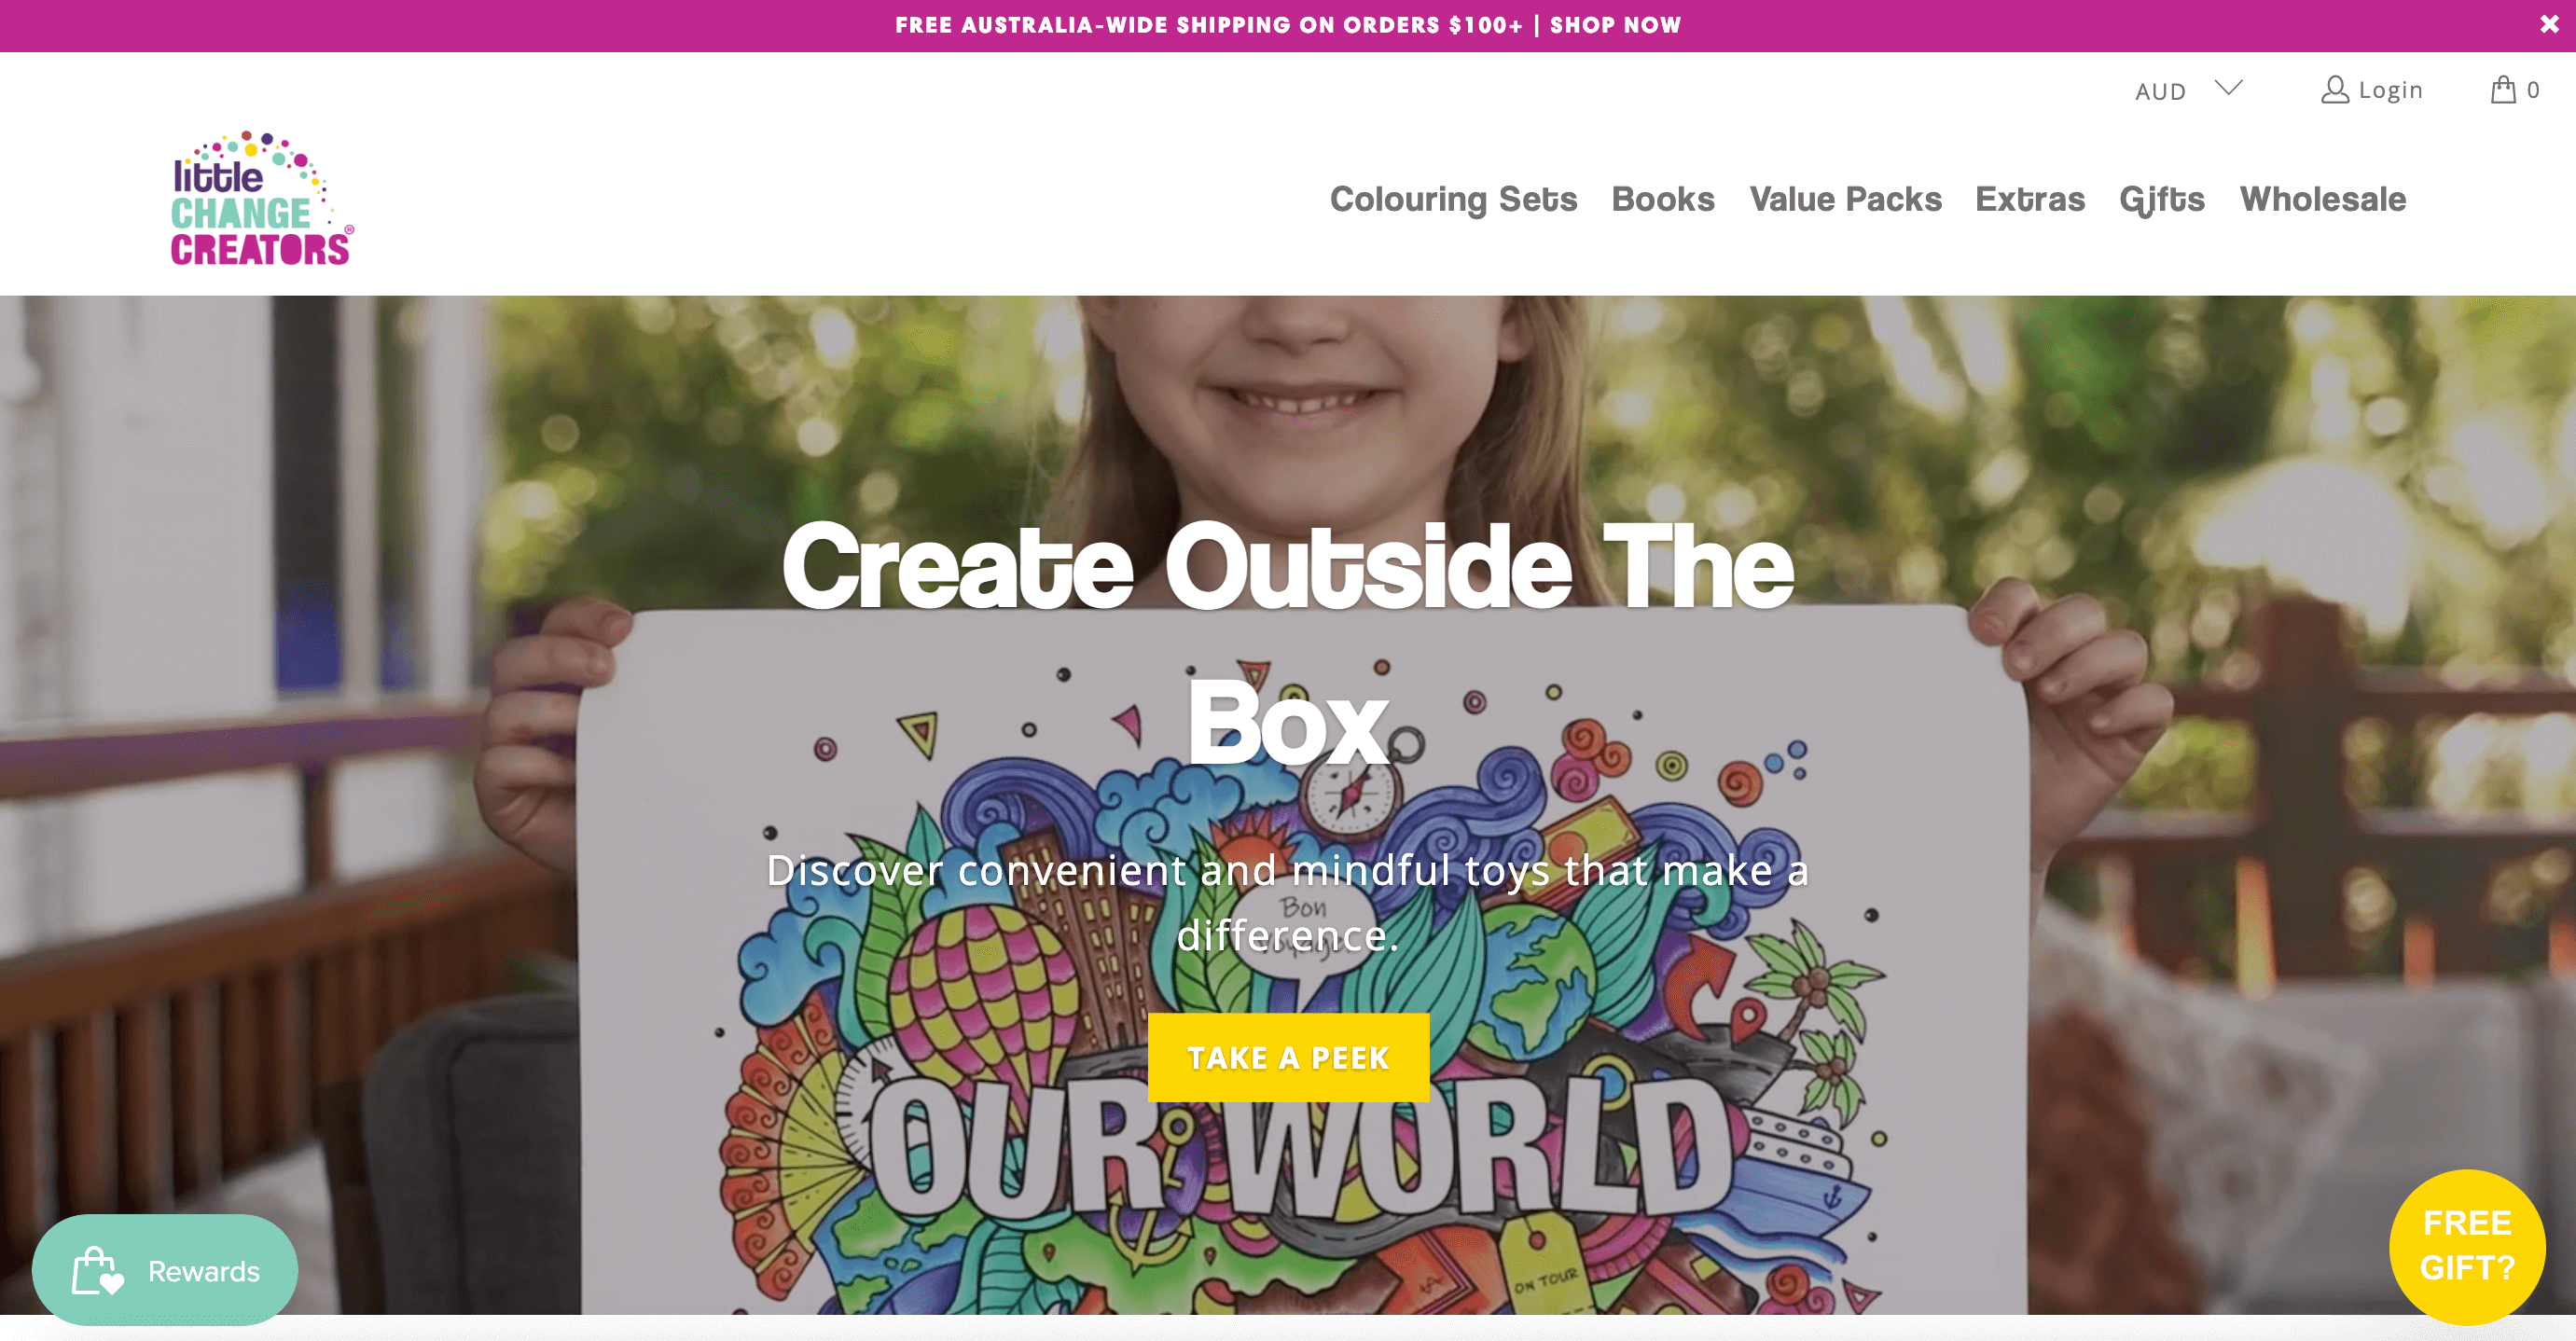 Sustainable brands–Little Change Creators website homepage. The banner image shows a smiling child holding a colorful drawing with the words Our World surrounded by images of globes, leads, trees, and other icons. The text on top of the image says Create Outside The Box. Discover convenient and mindful toys that make a difference. Take a Peek. 